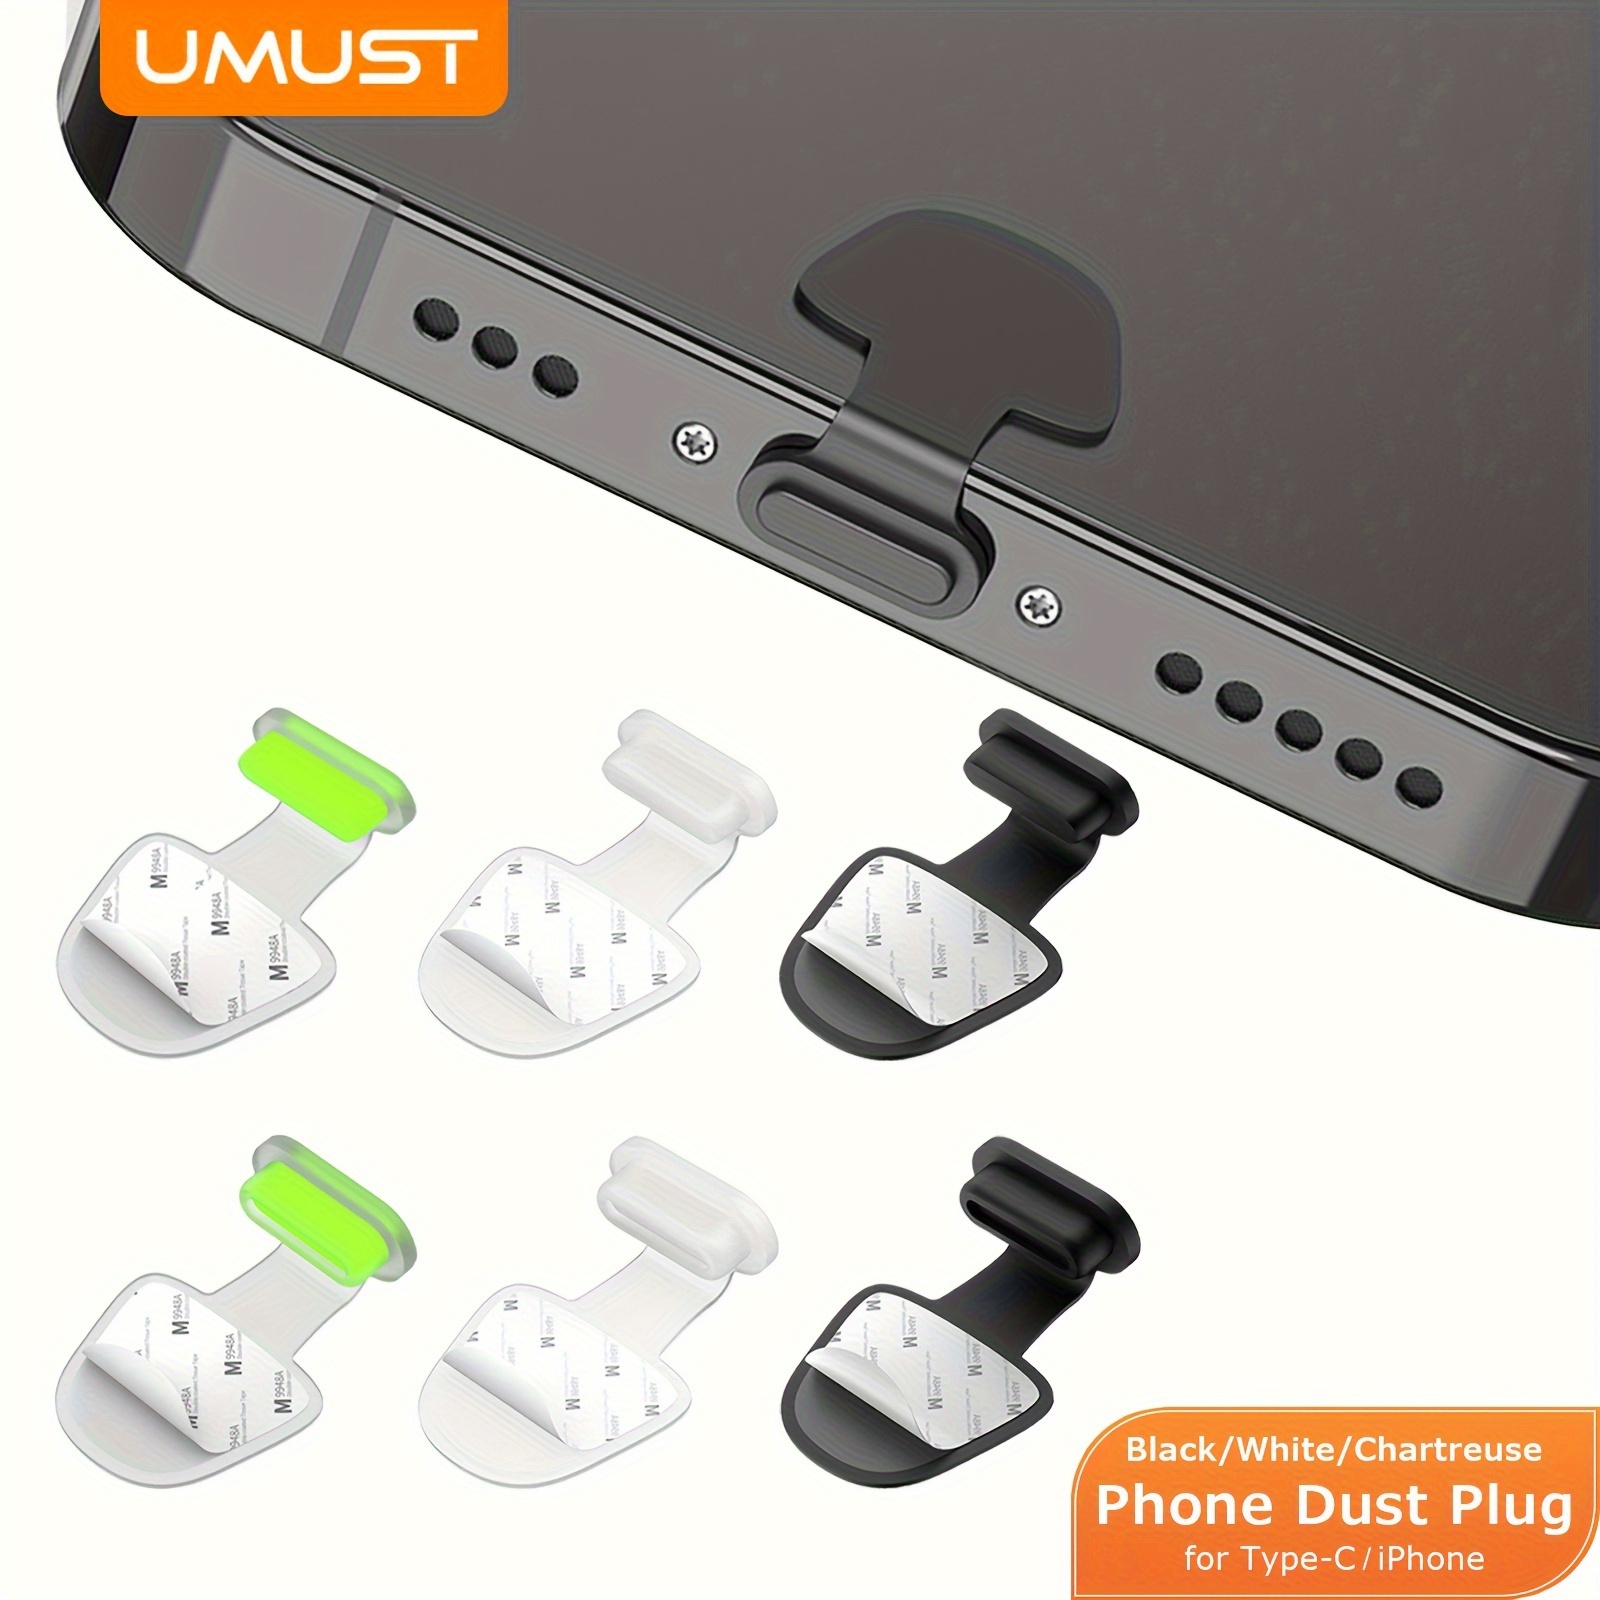 USB Port Caps, Silicone Anti Dust Cover Port Protection Plug for USB  Type-C, 3.5mm Headphone, USB HDMI Port Total 20pcs